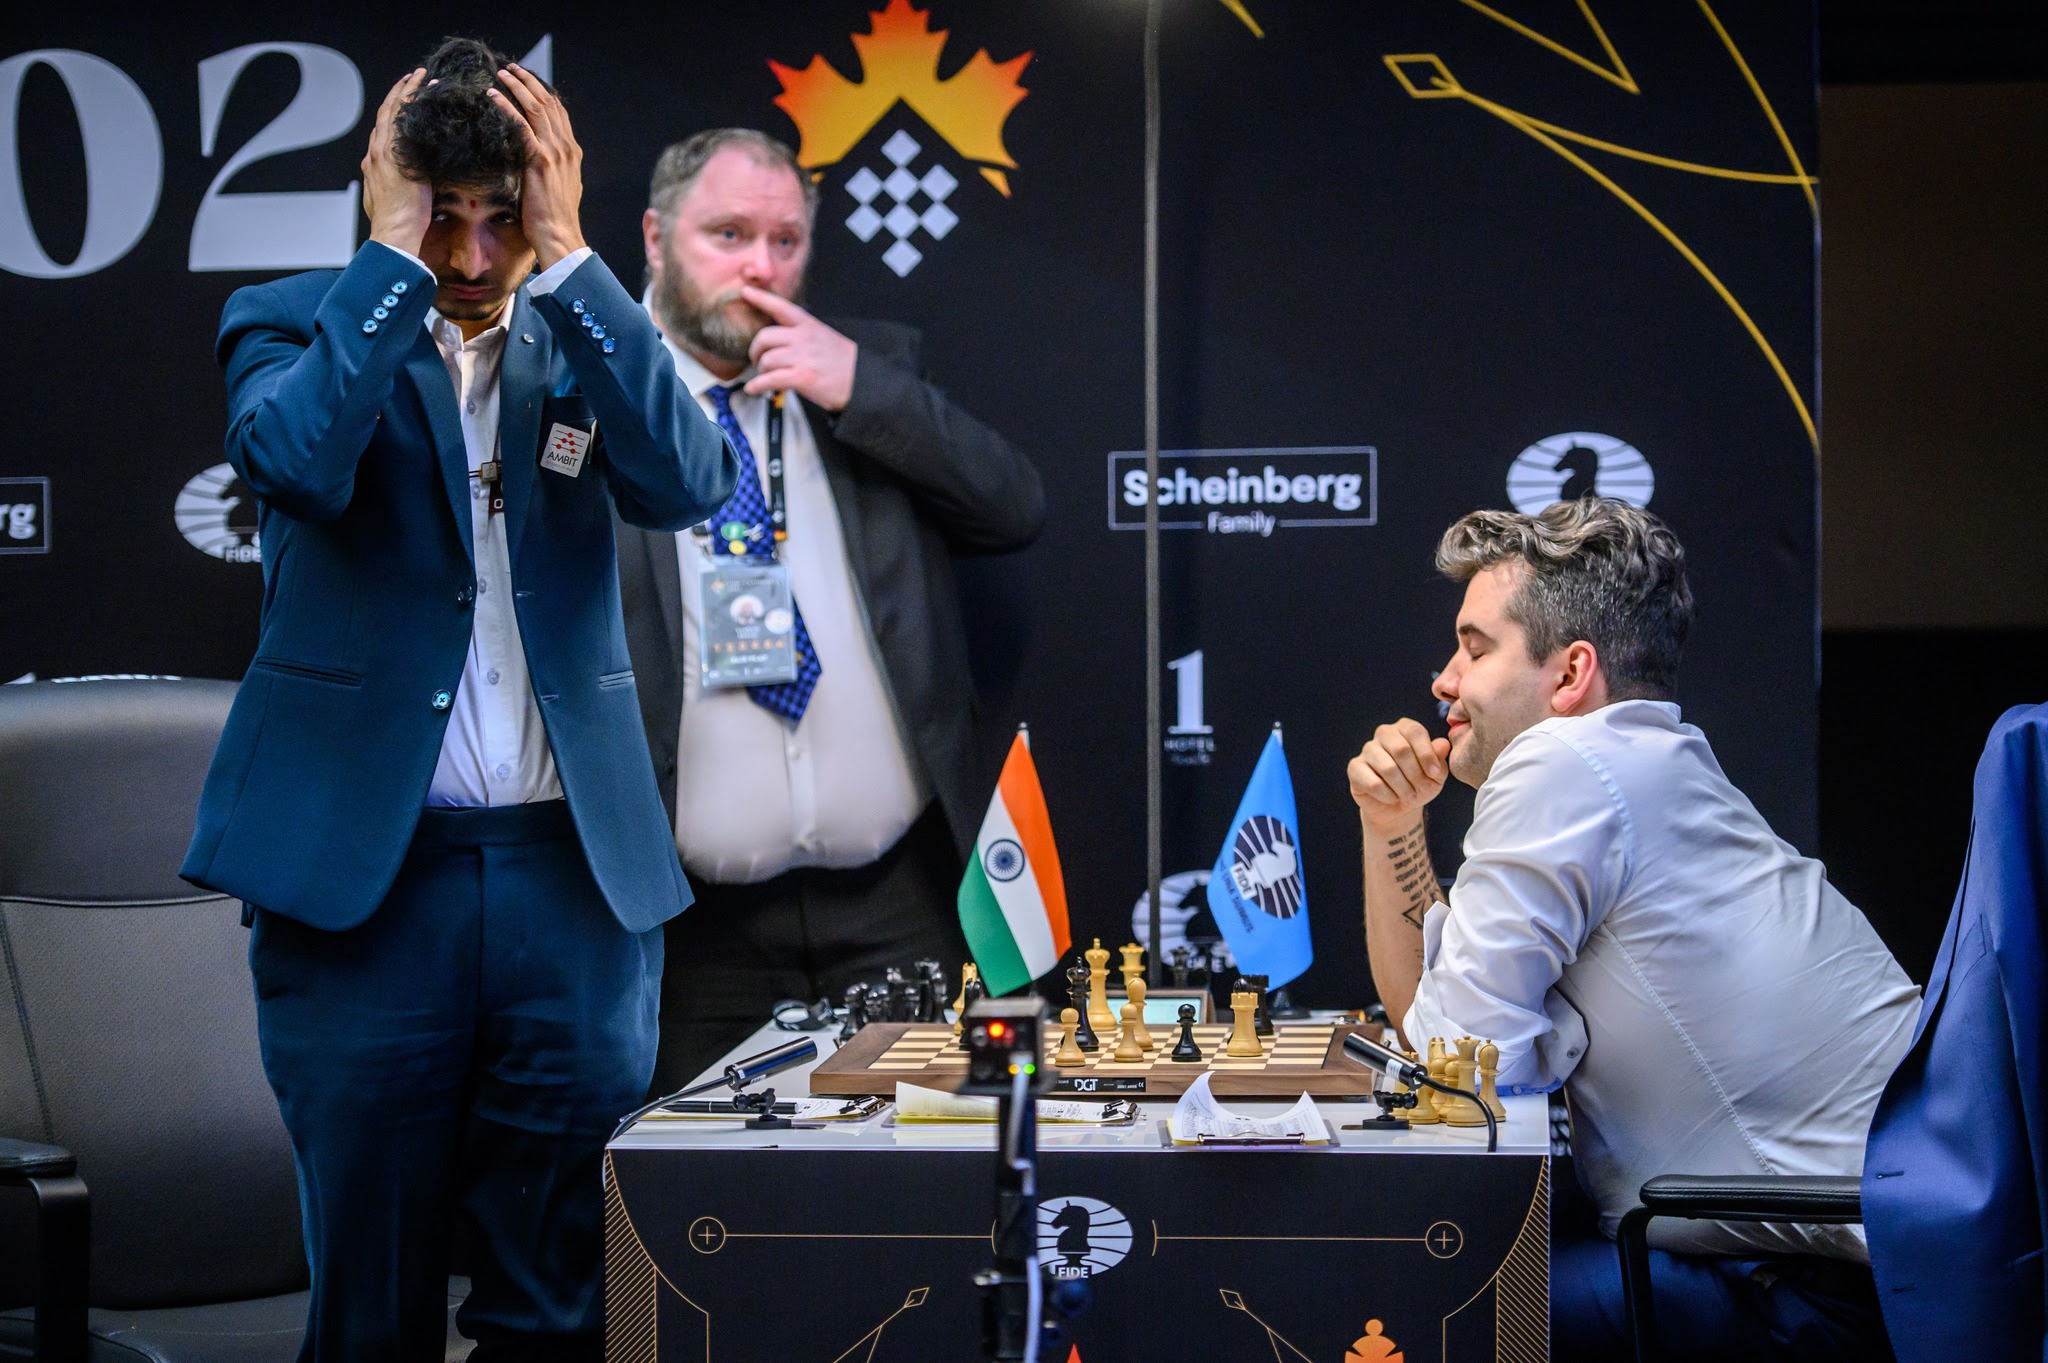 Nepomniachtchi and Tan in the Lead Again - FIDE Candidates